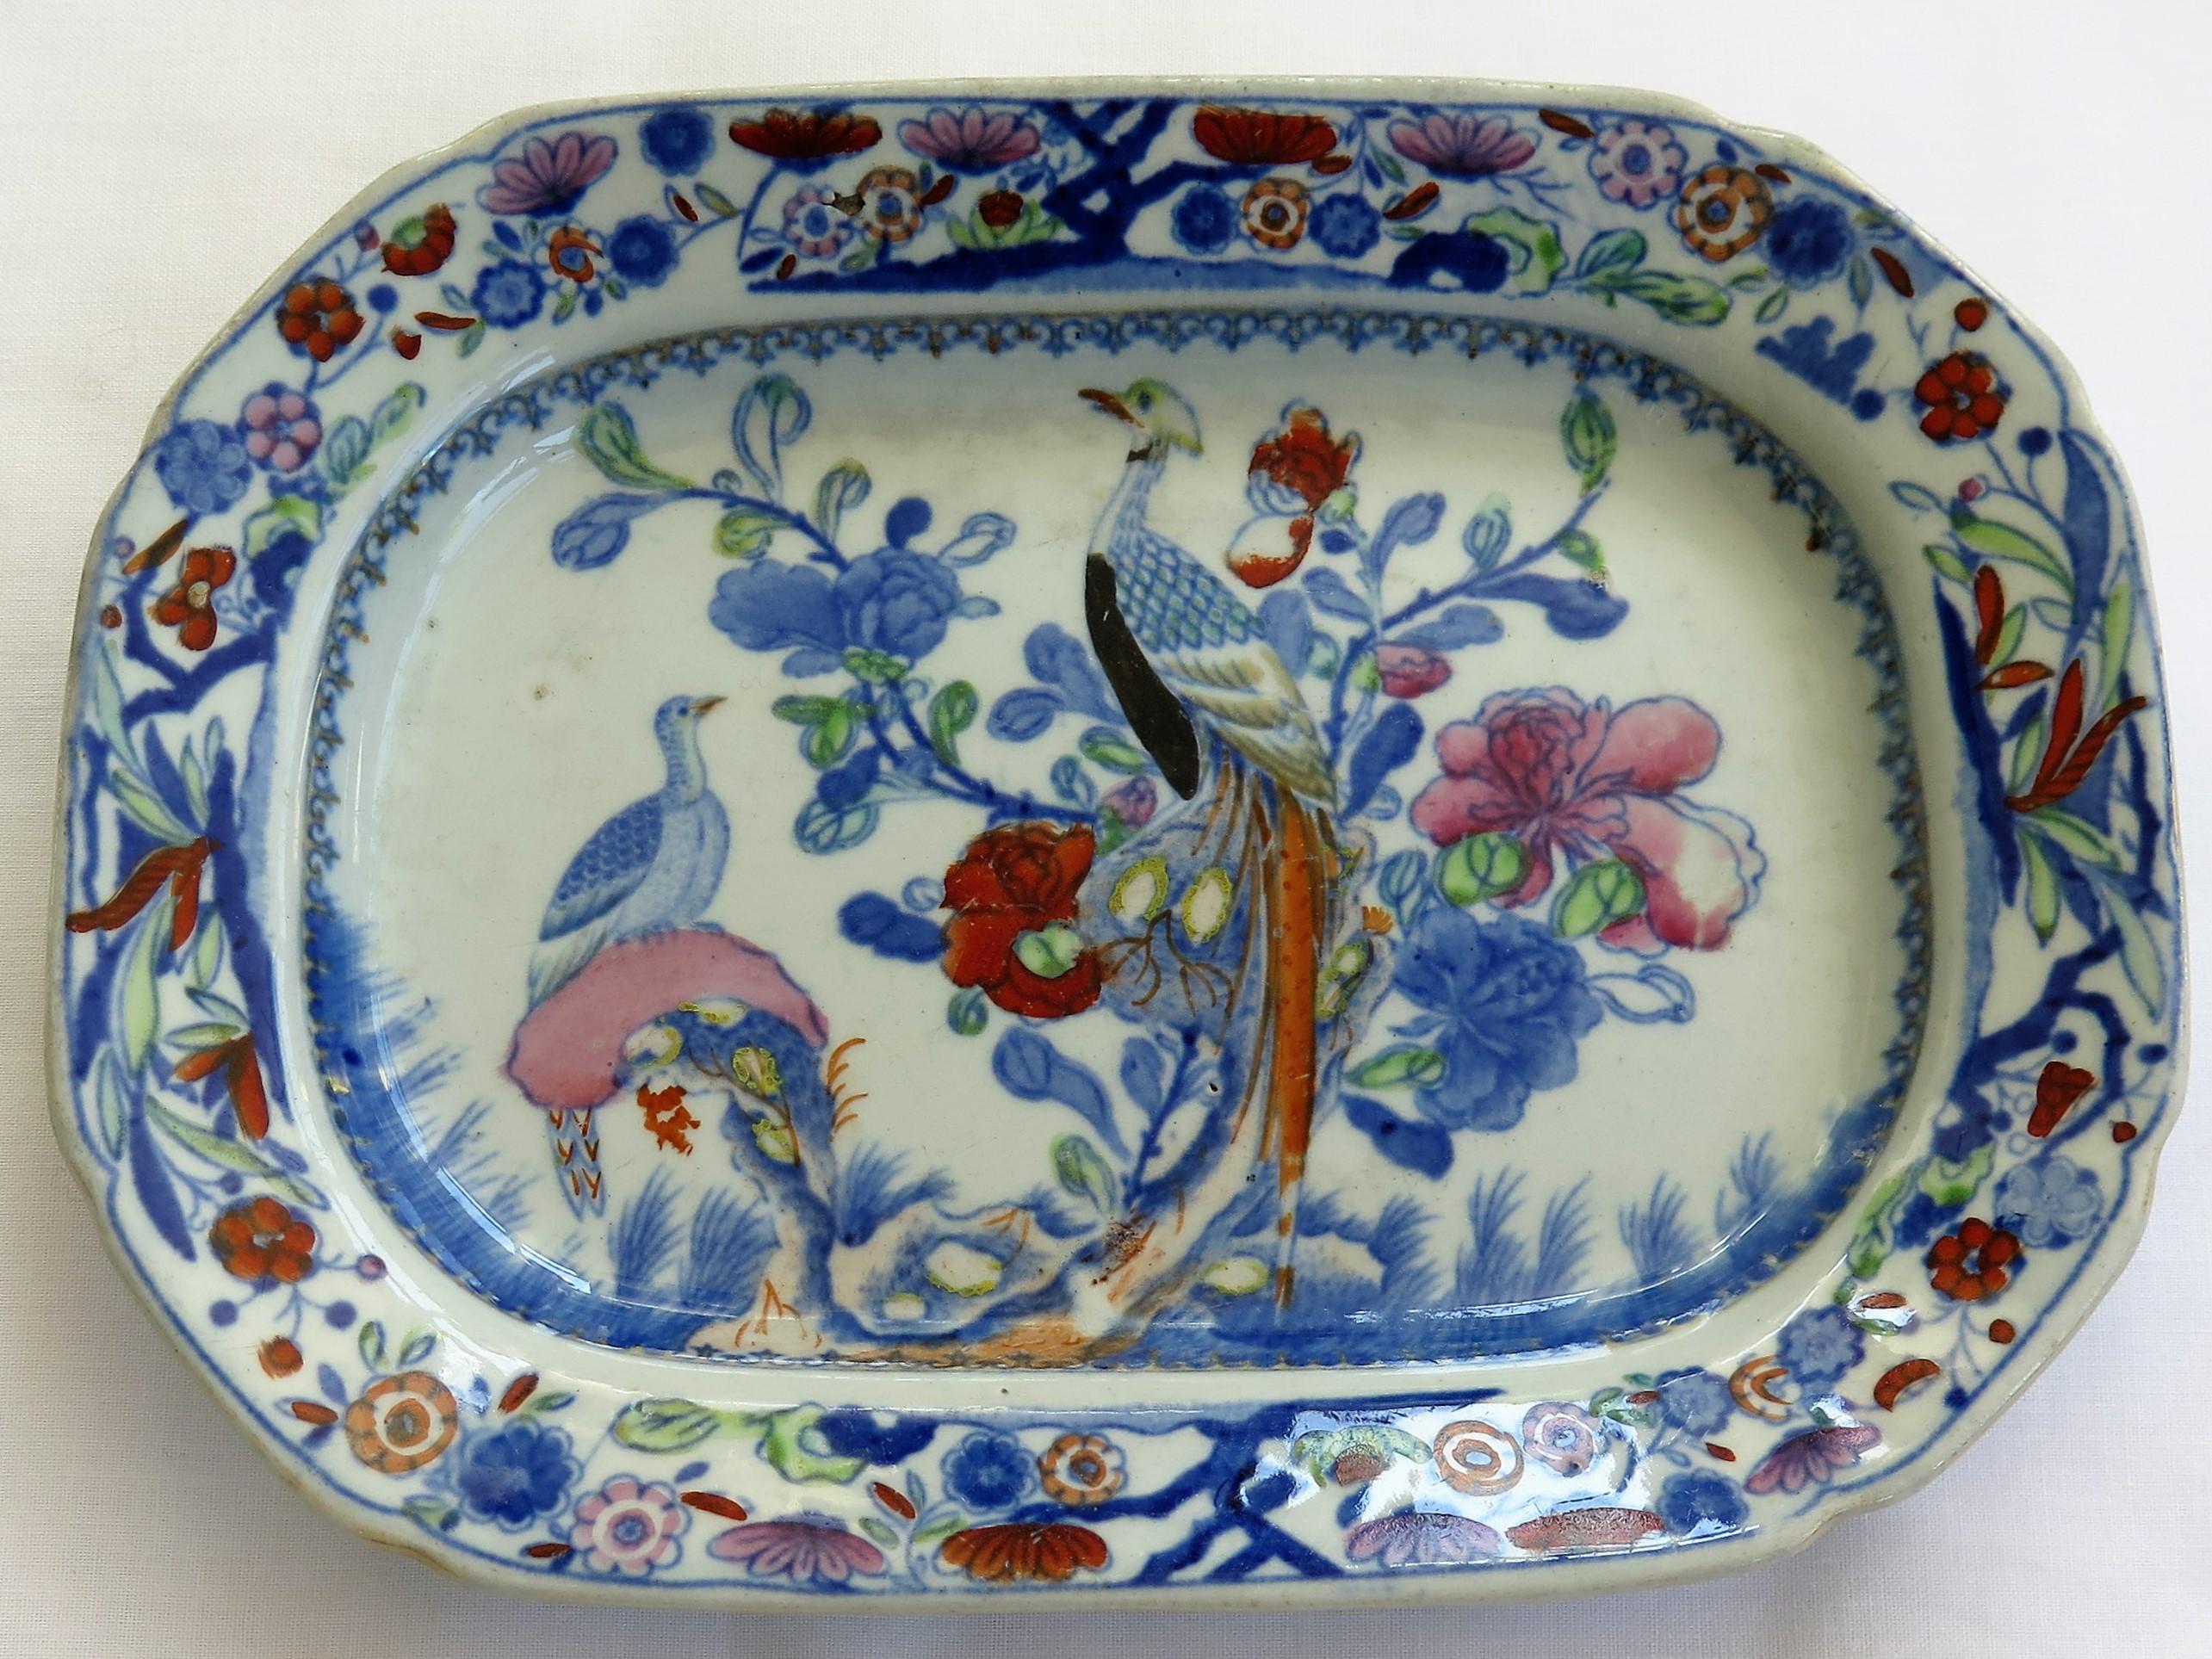 This is a very decorative dish or small tray by Mason's Ironstone, Lane Delph, England in the Oriental Pheasant pattern, dating to the very earliest transitional period of Mason's ironstone, circa 1812.

The dish is rectangular in shape with a